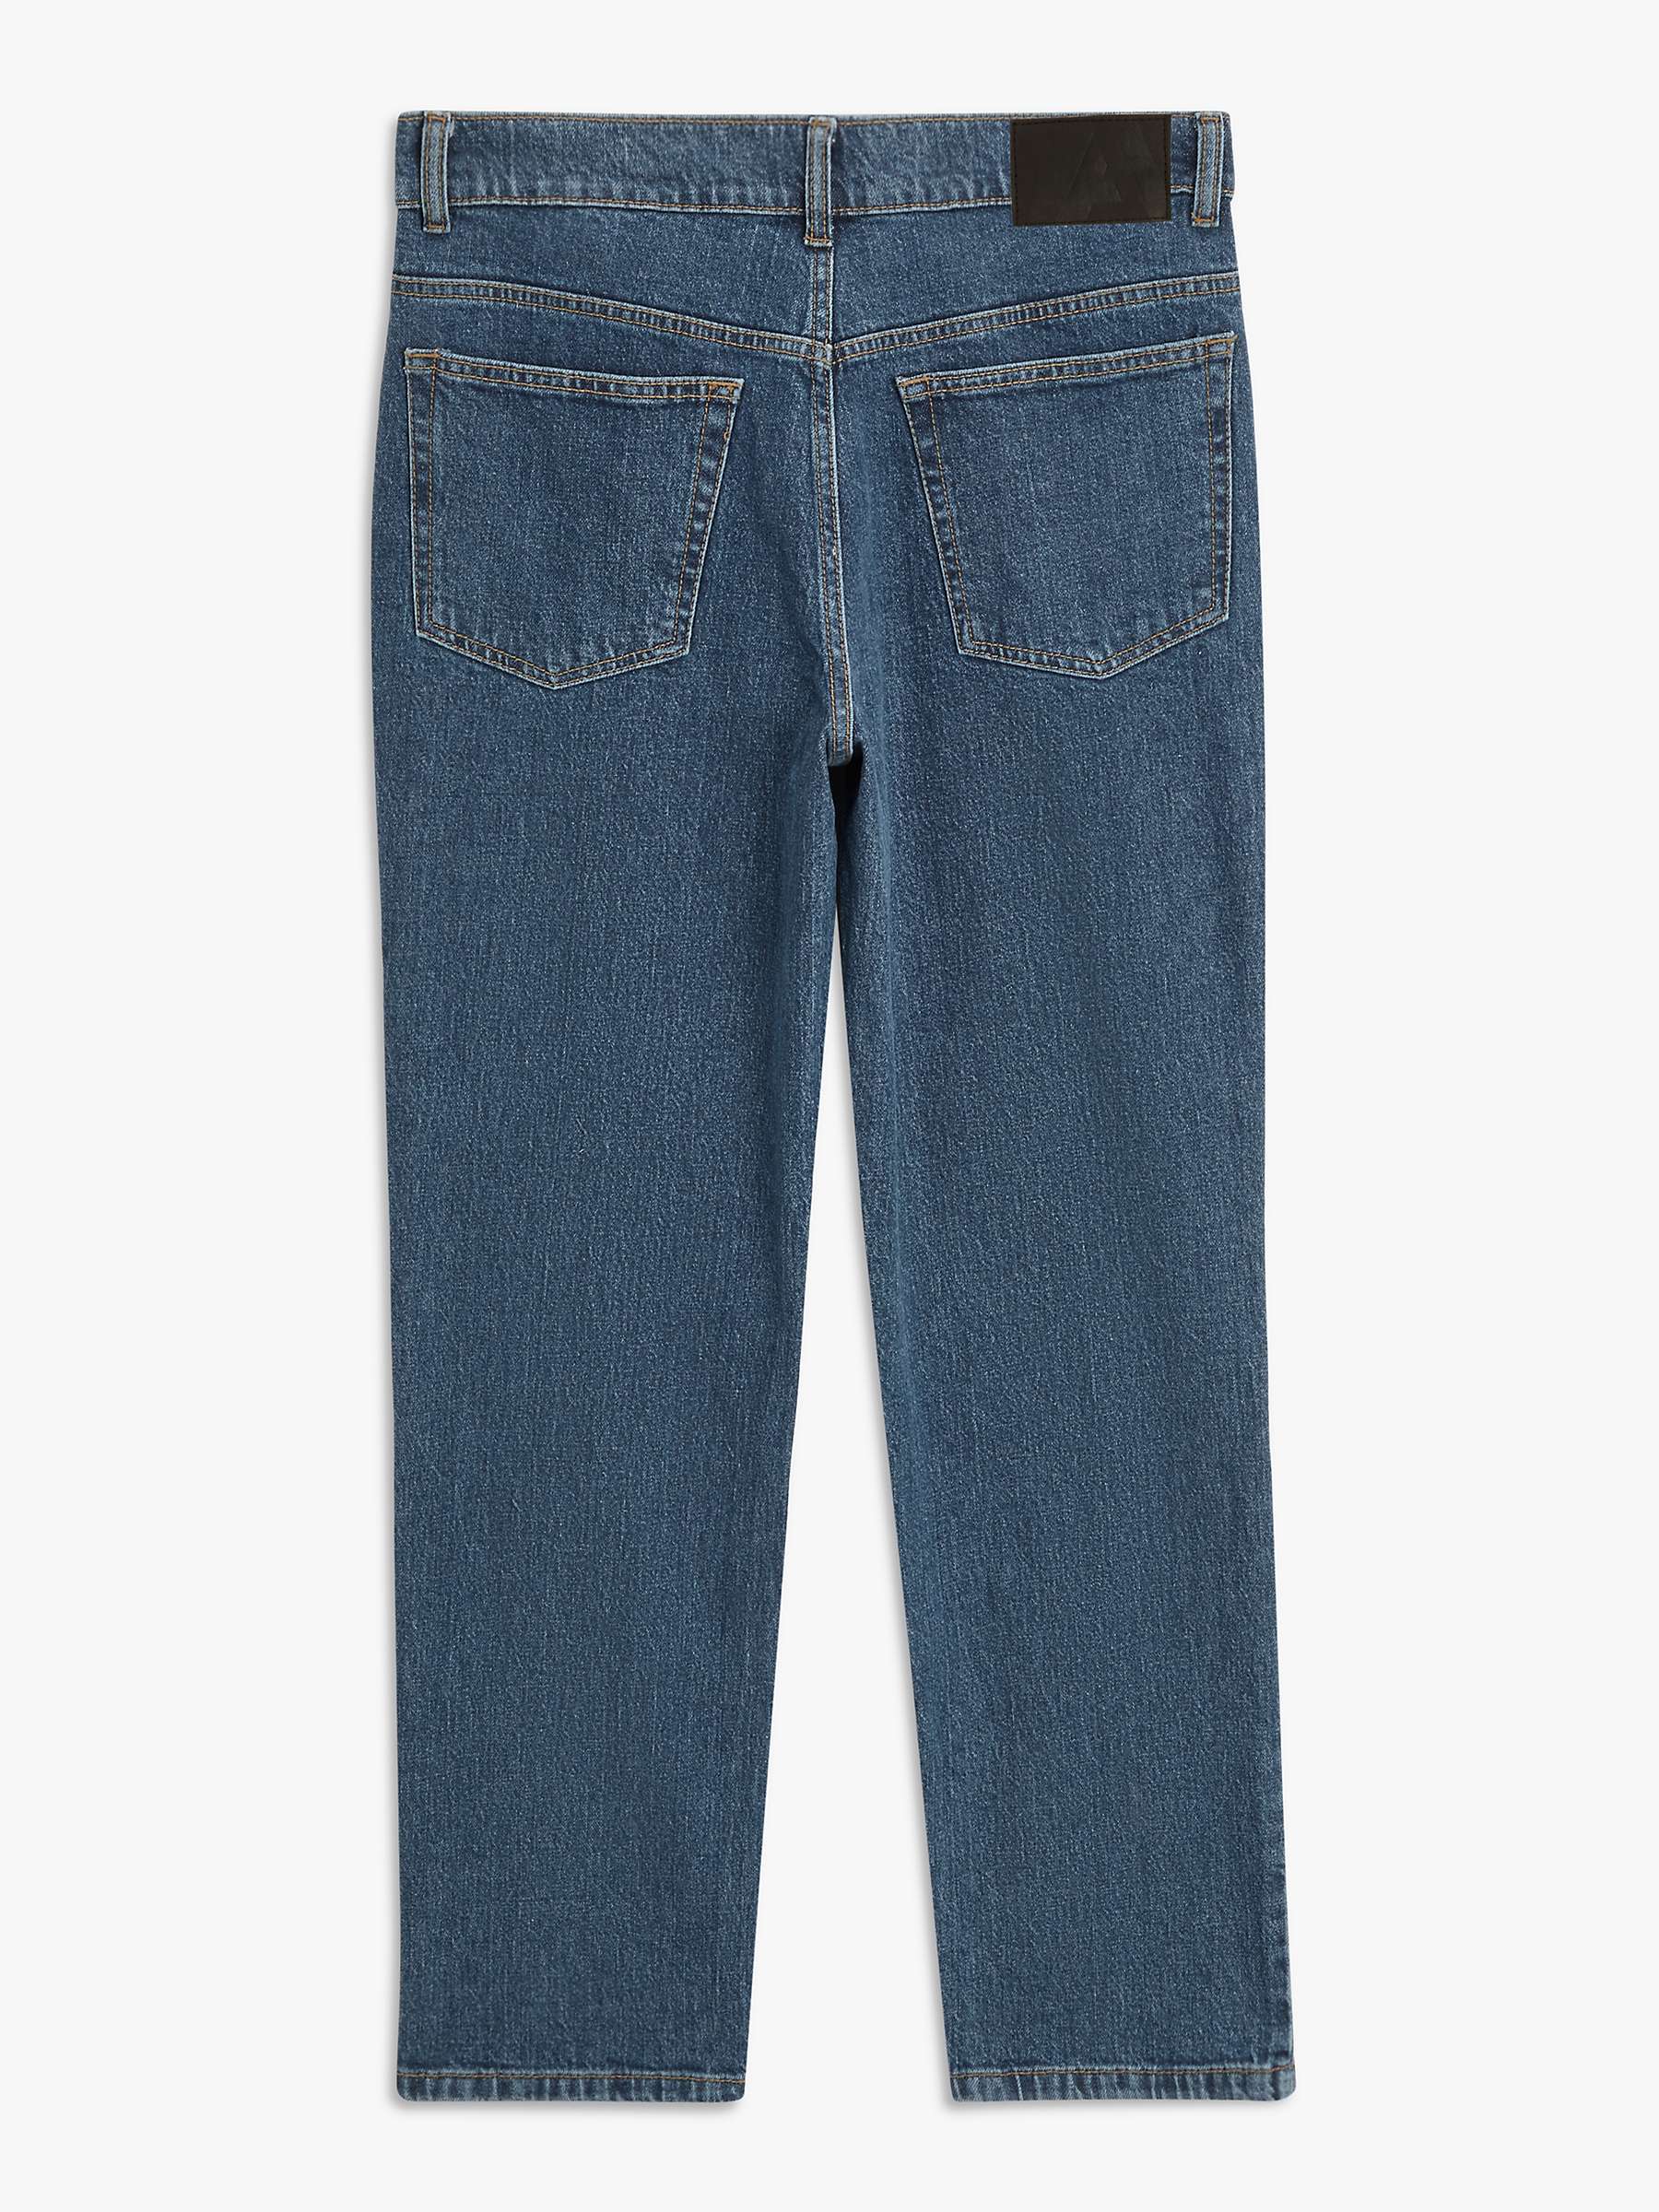 Buy John Lewis ANYDAY Straight Fit Denim Jeans, Mid Wash Online at johnlewis.com